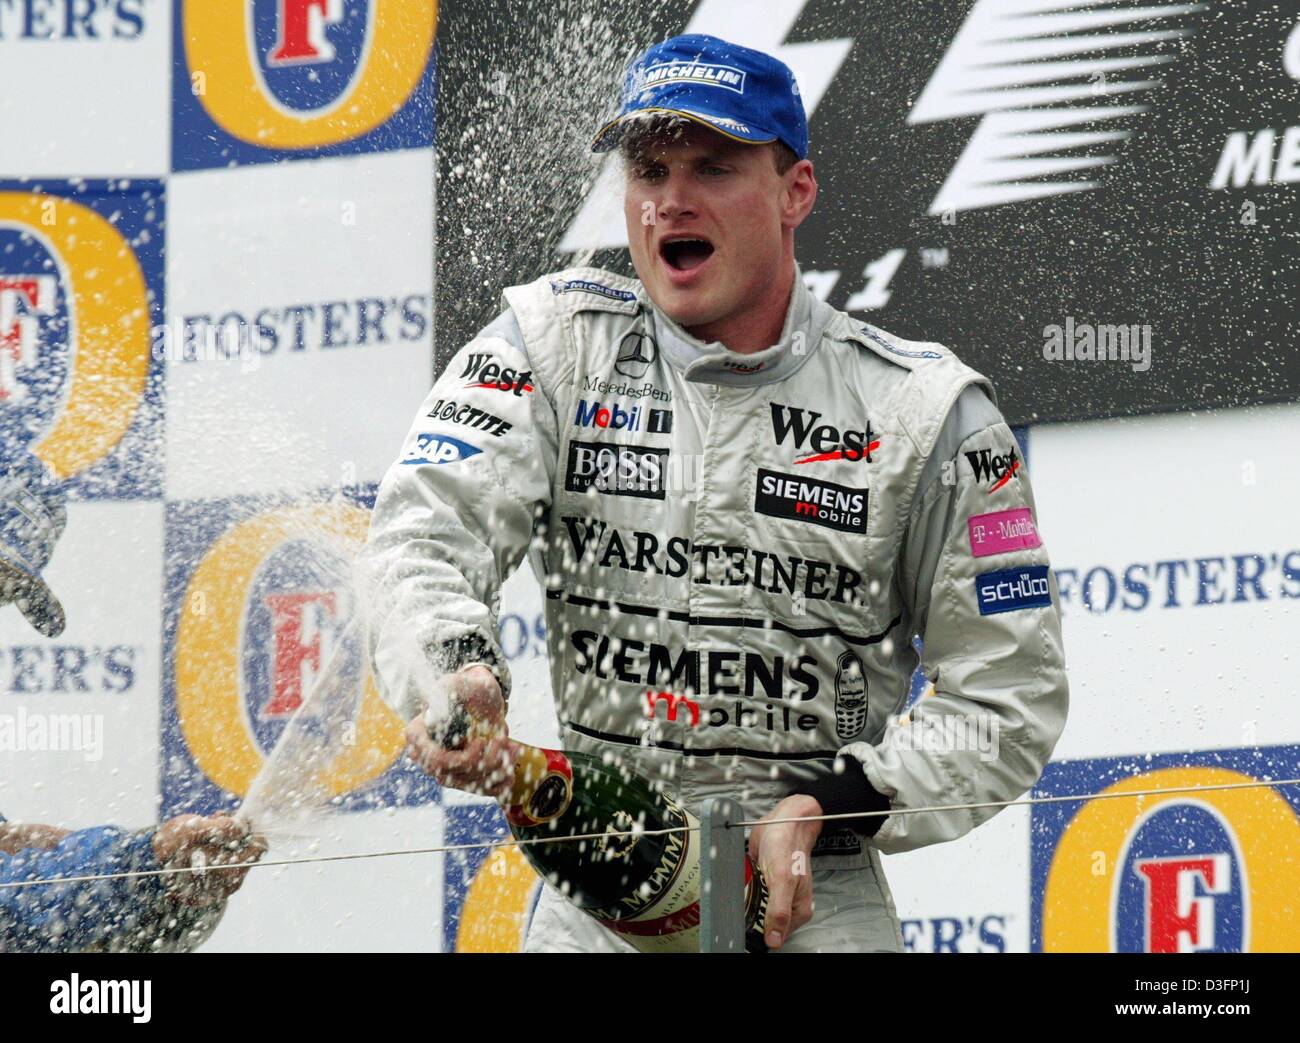 (dpa) - Scottish formula one pilot David Coulthard of McLaren-Mercedes squirts champagne in Melbourne, Australia, 9 March 2003. He wins the year's first race of the formula one for the Grand Prix of Australia and celebrates his 13th victory in his 142nd formula one race. Stock Photo